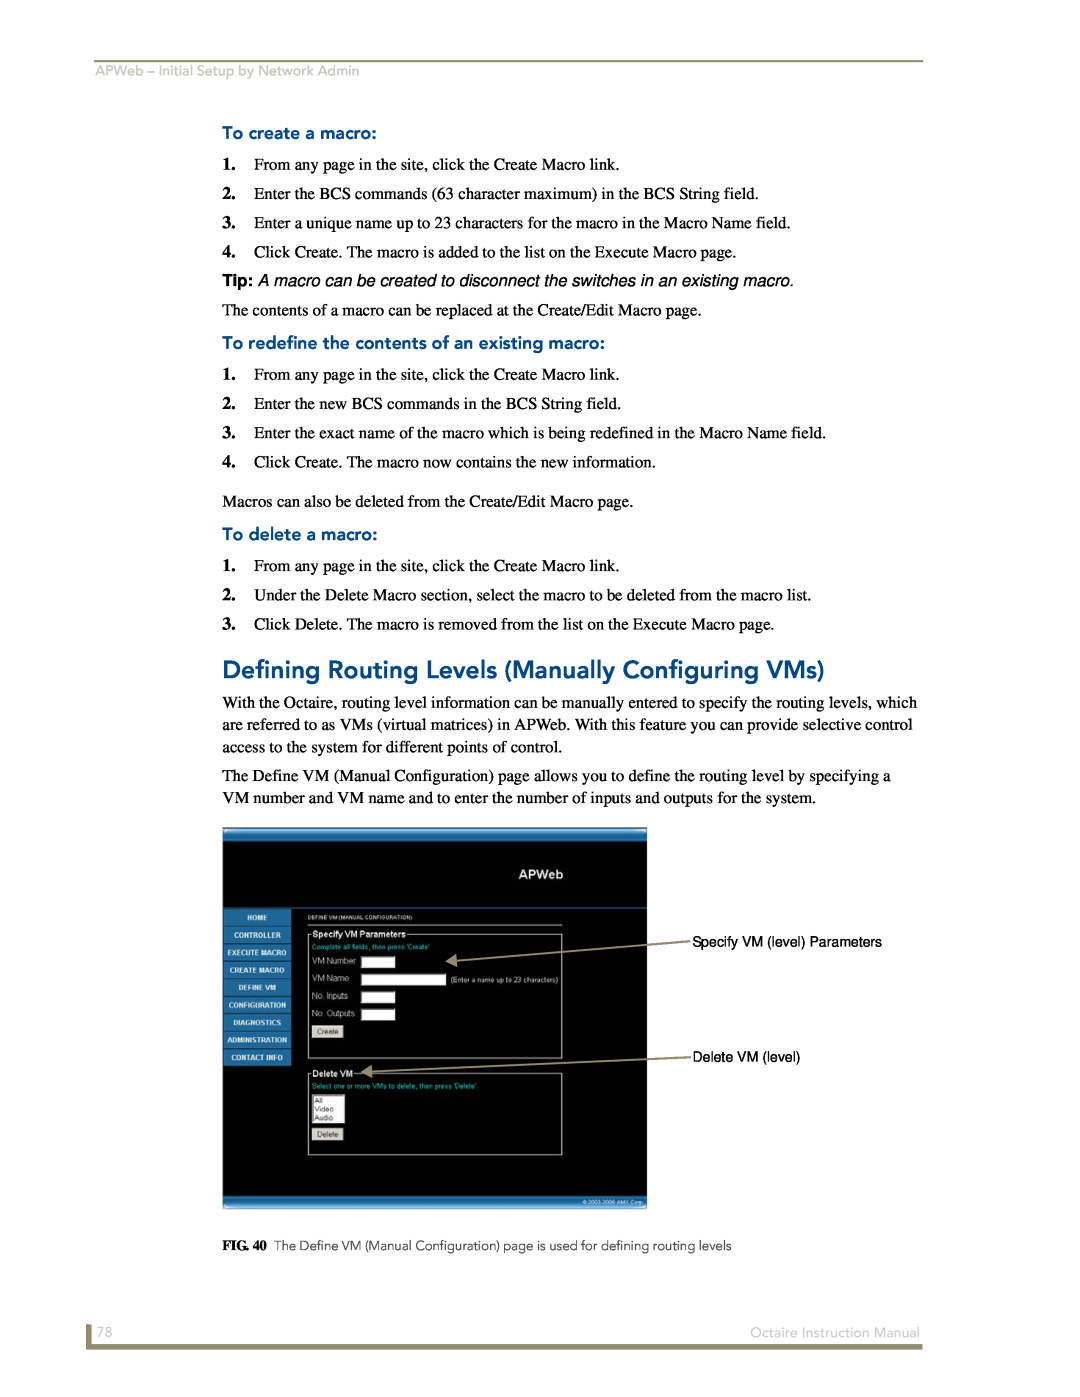 AMX Octaire instruction manual Defining Routing Levels Manually Configuring VMs, To create a macro, To delete a macro 